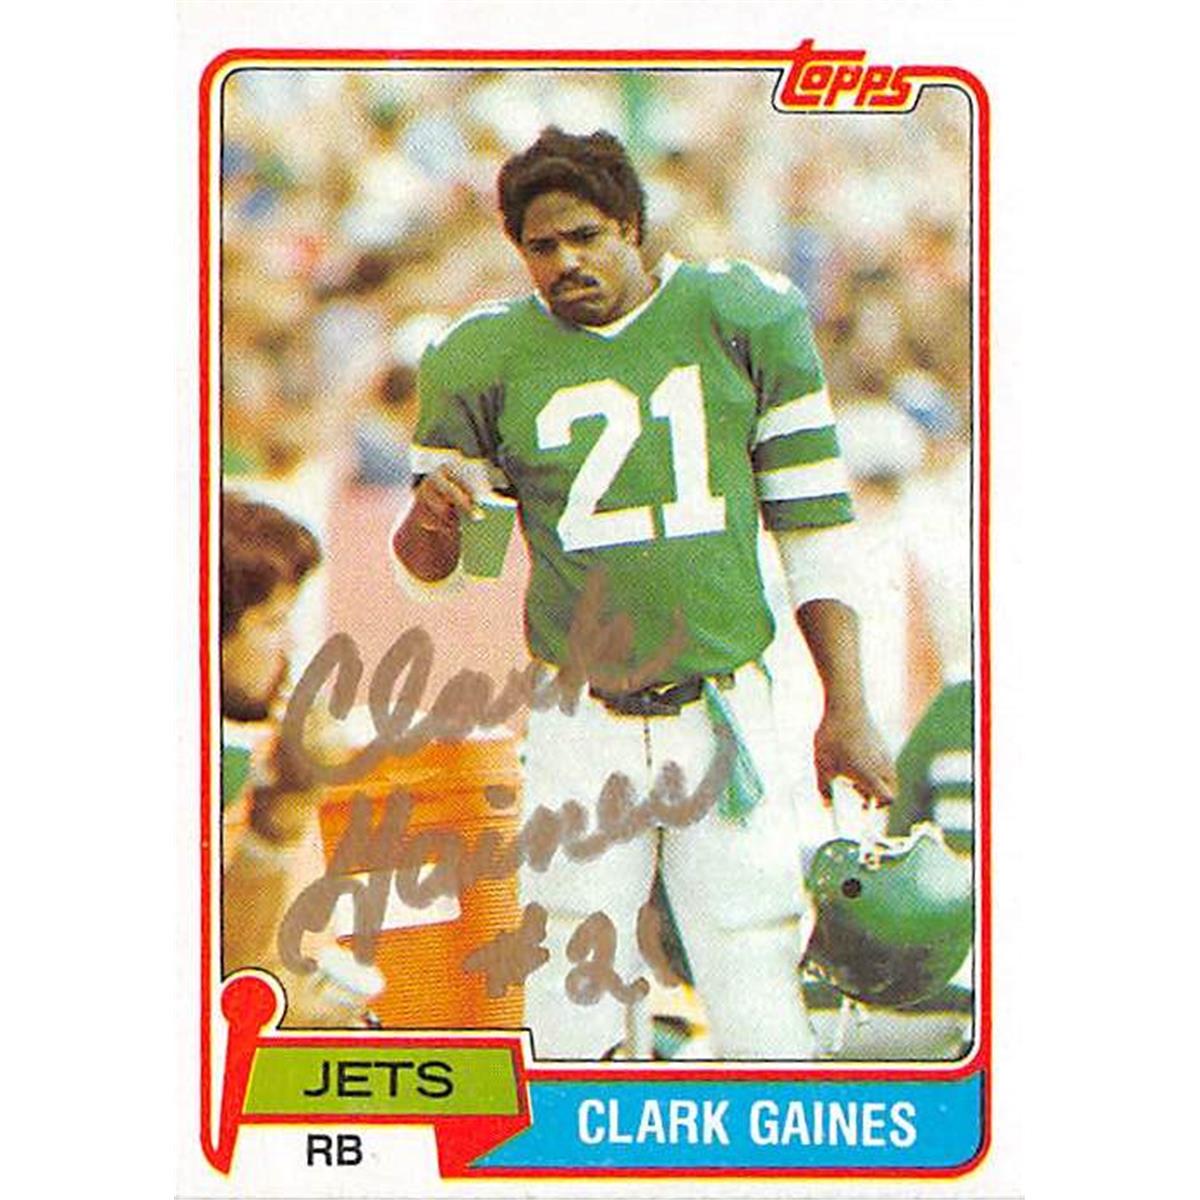 Picture of Autograph Warehouse 377243 Clark Gaines Autographed Football Card - New York Jets 1981 Topps No.144 Gold Signature